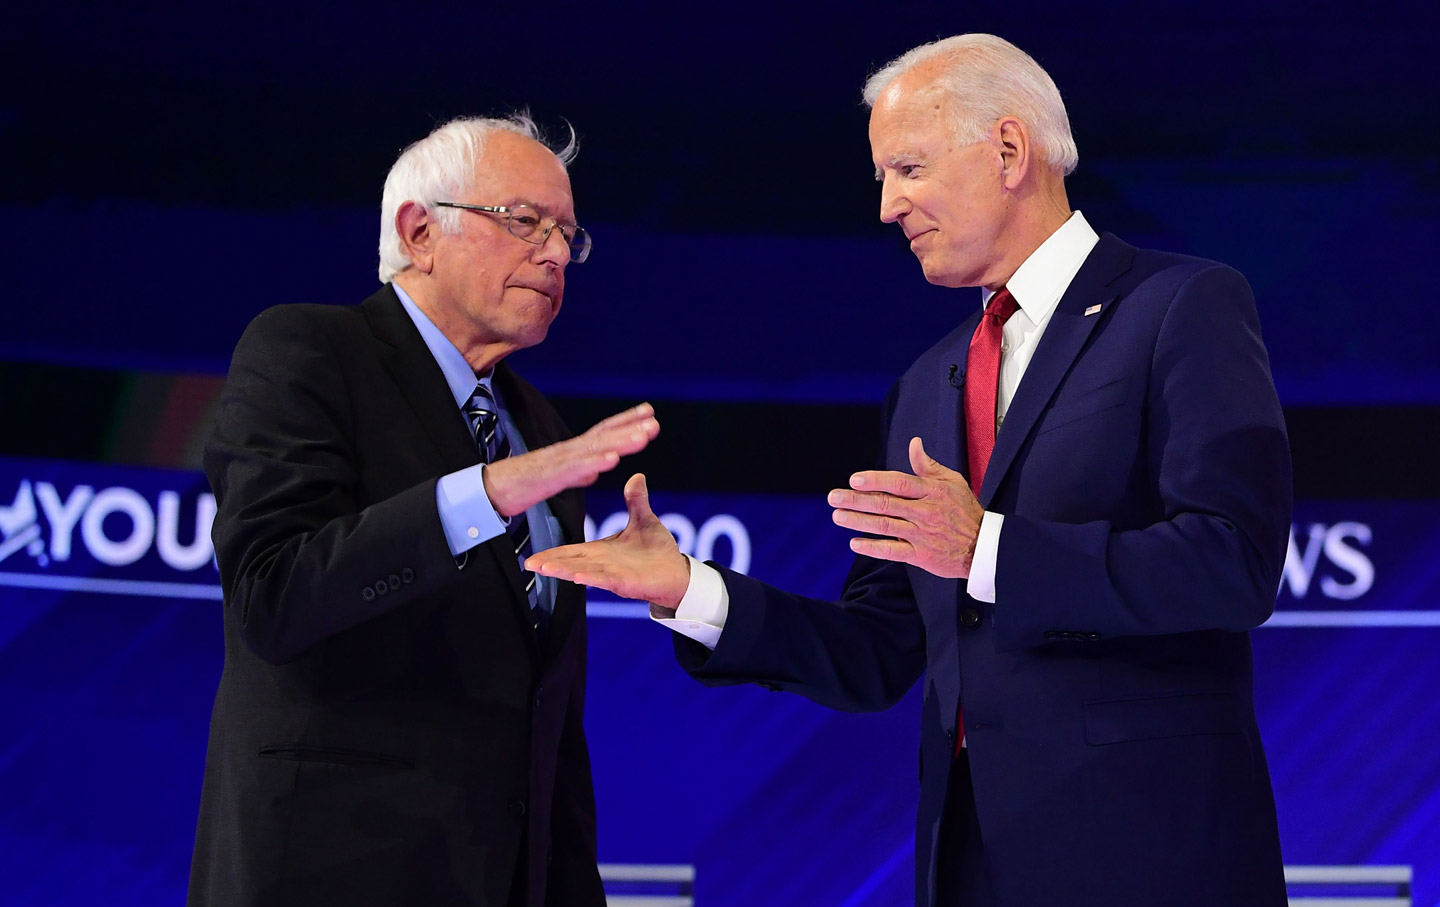 Progressives Should Support Biden Now but Be Ready to Push Later